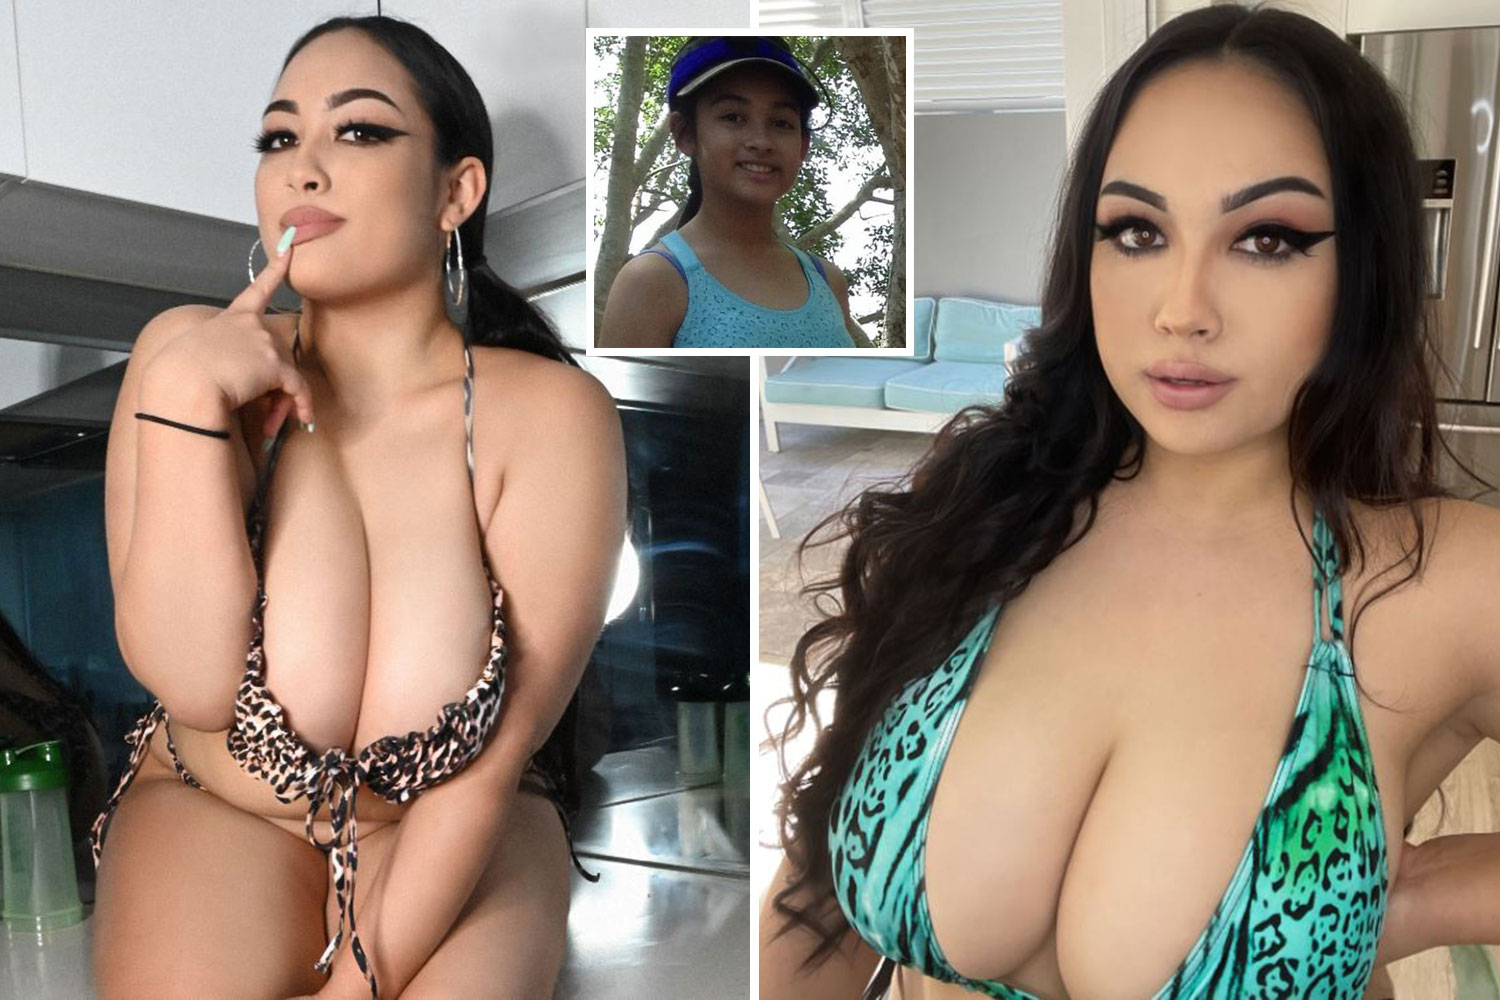 andrei boss recommends double h boobs pic